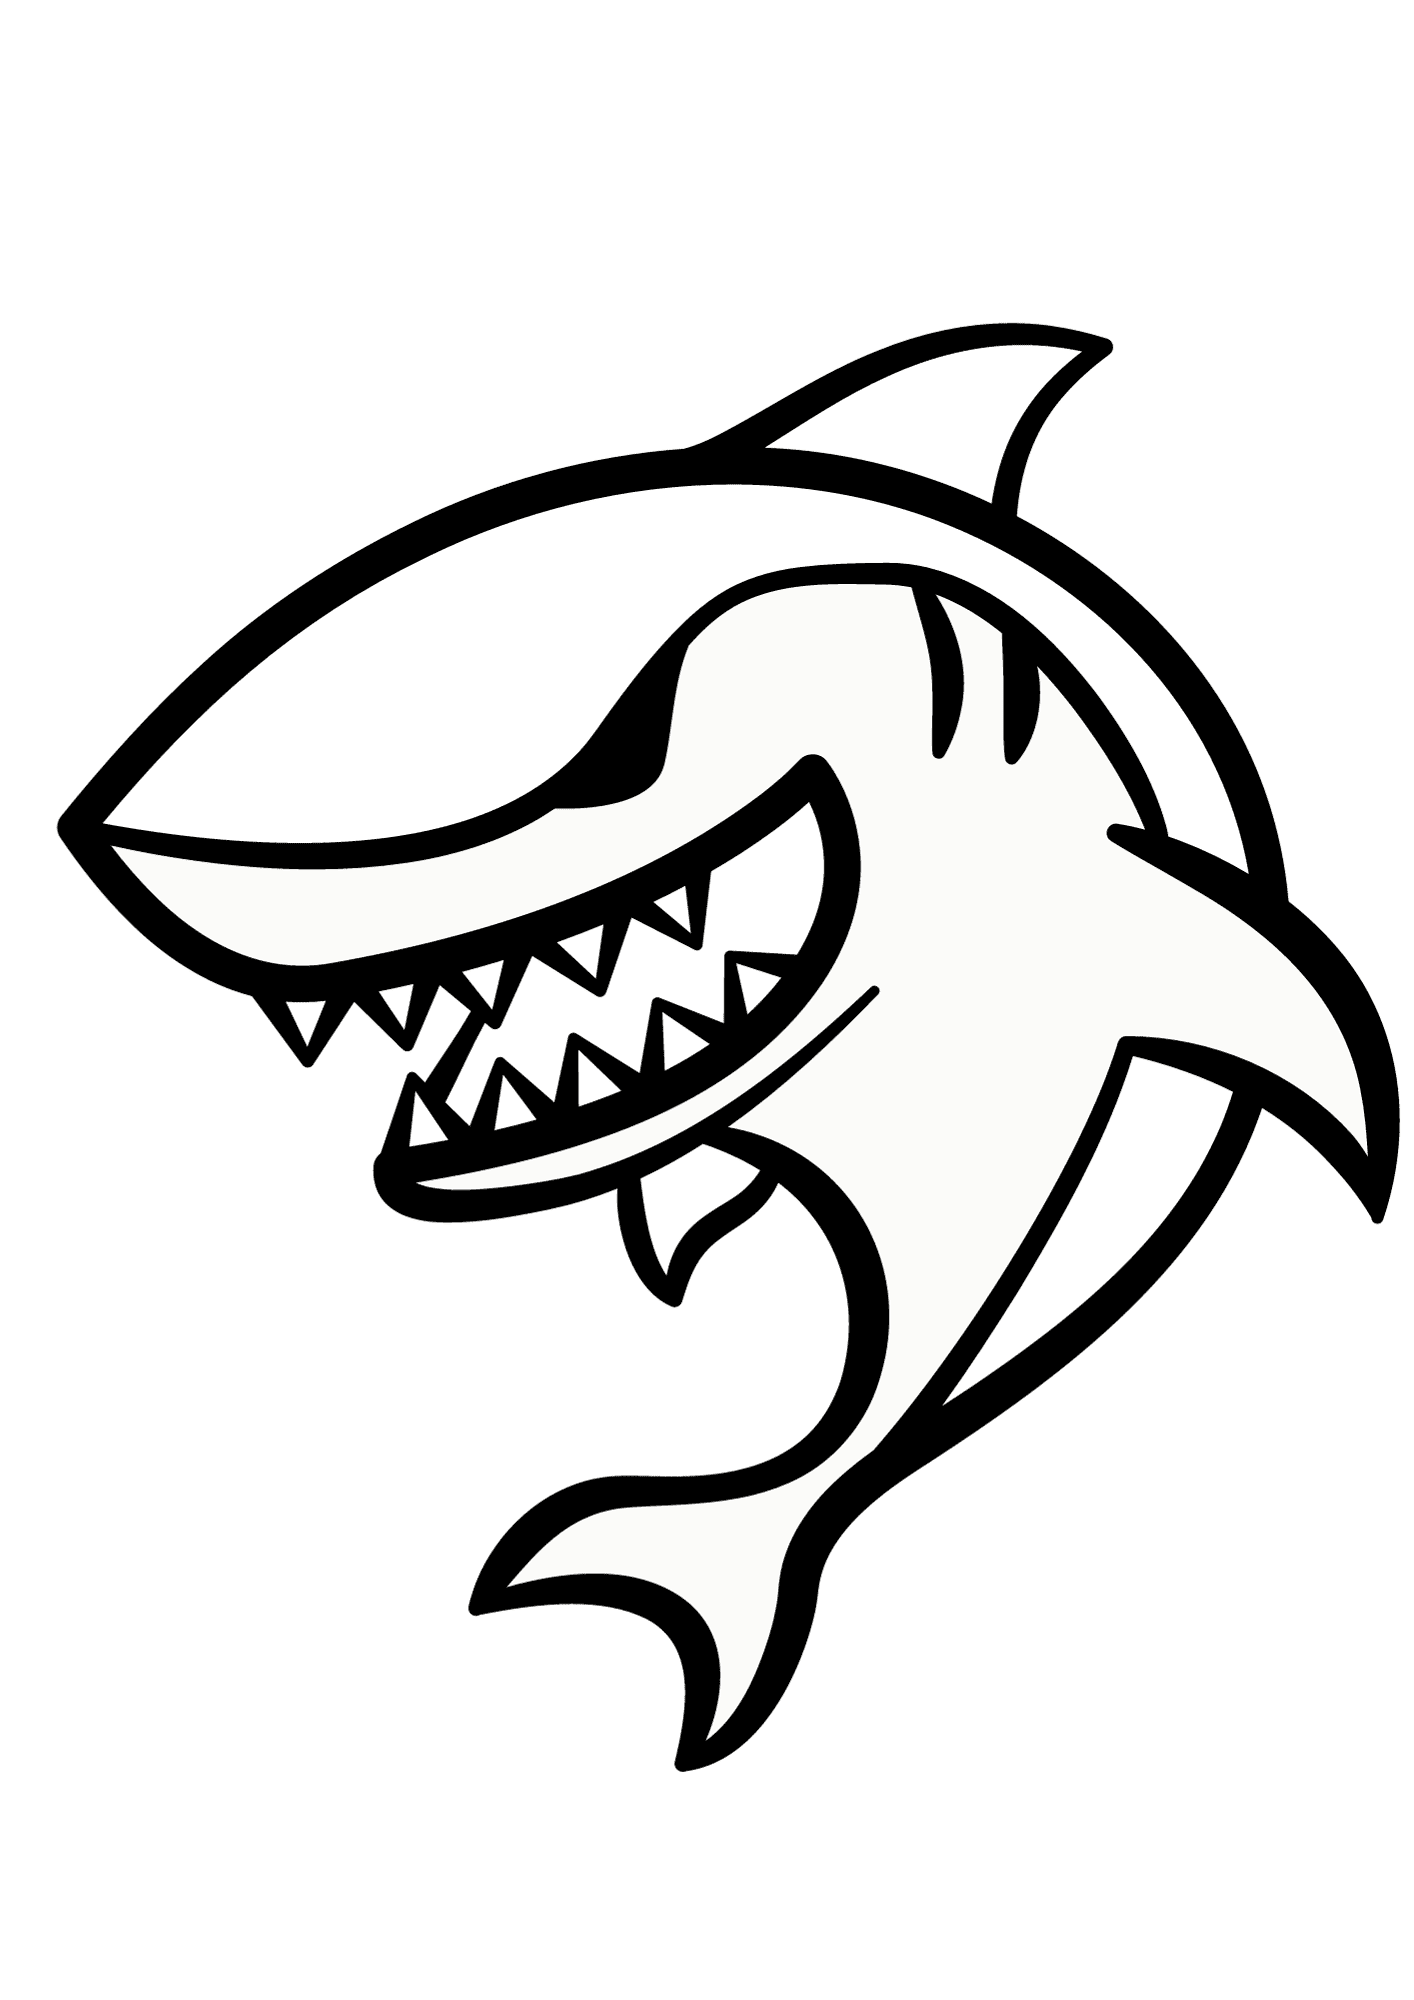 Shark Image To Color